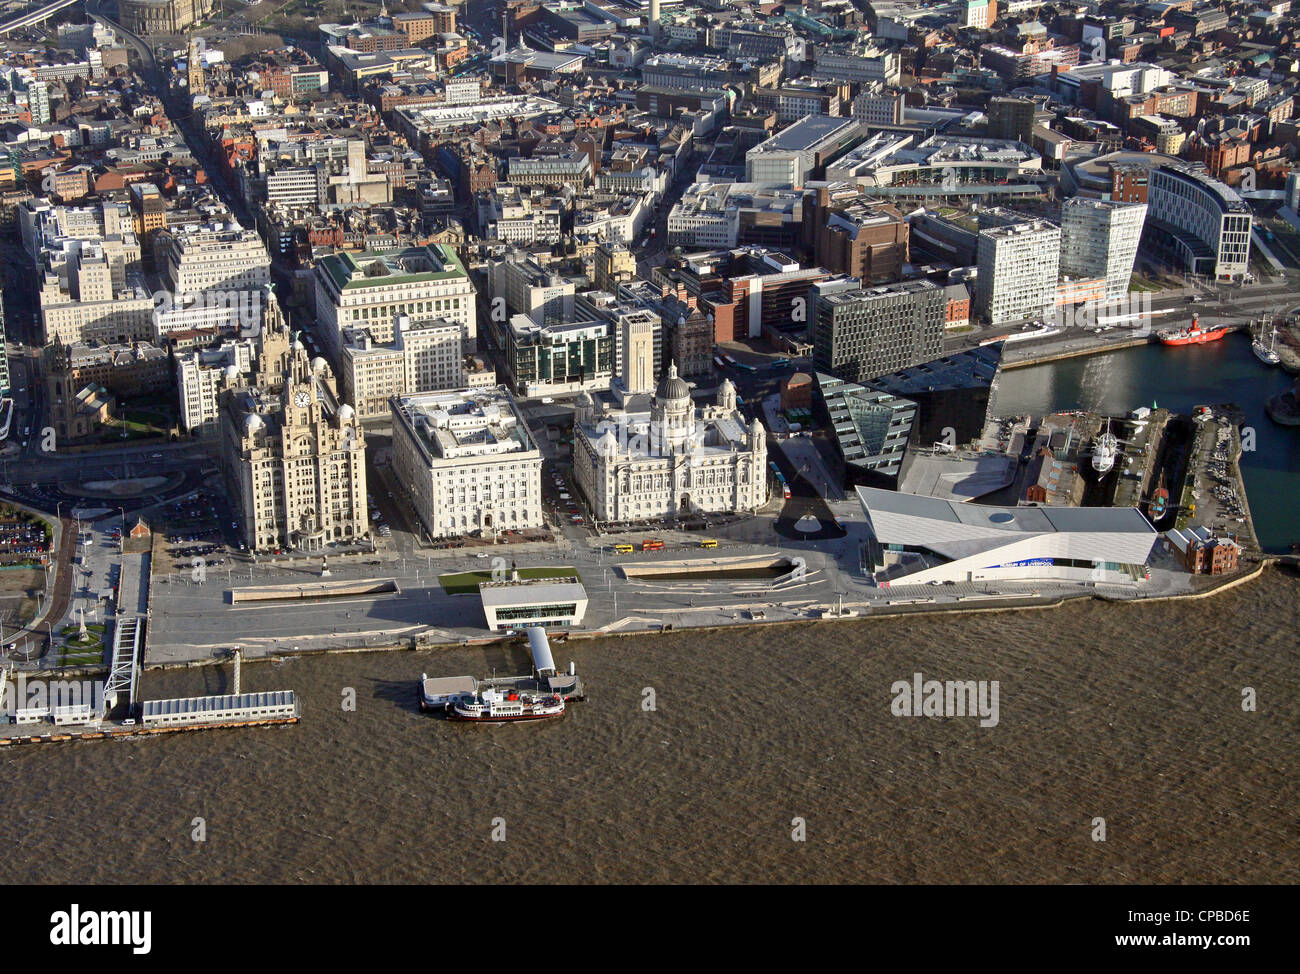 aerial view of Liverpool waterfront with Liver Building and new developments Stock Photo